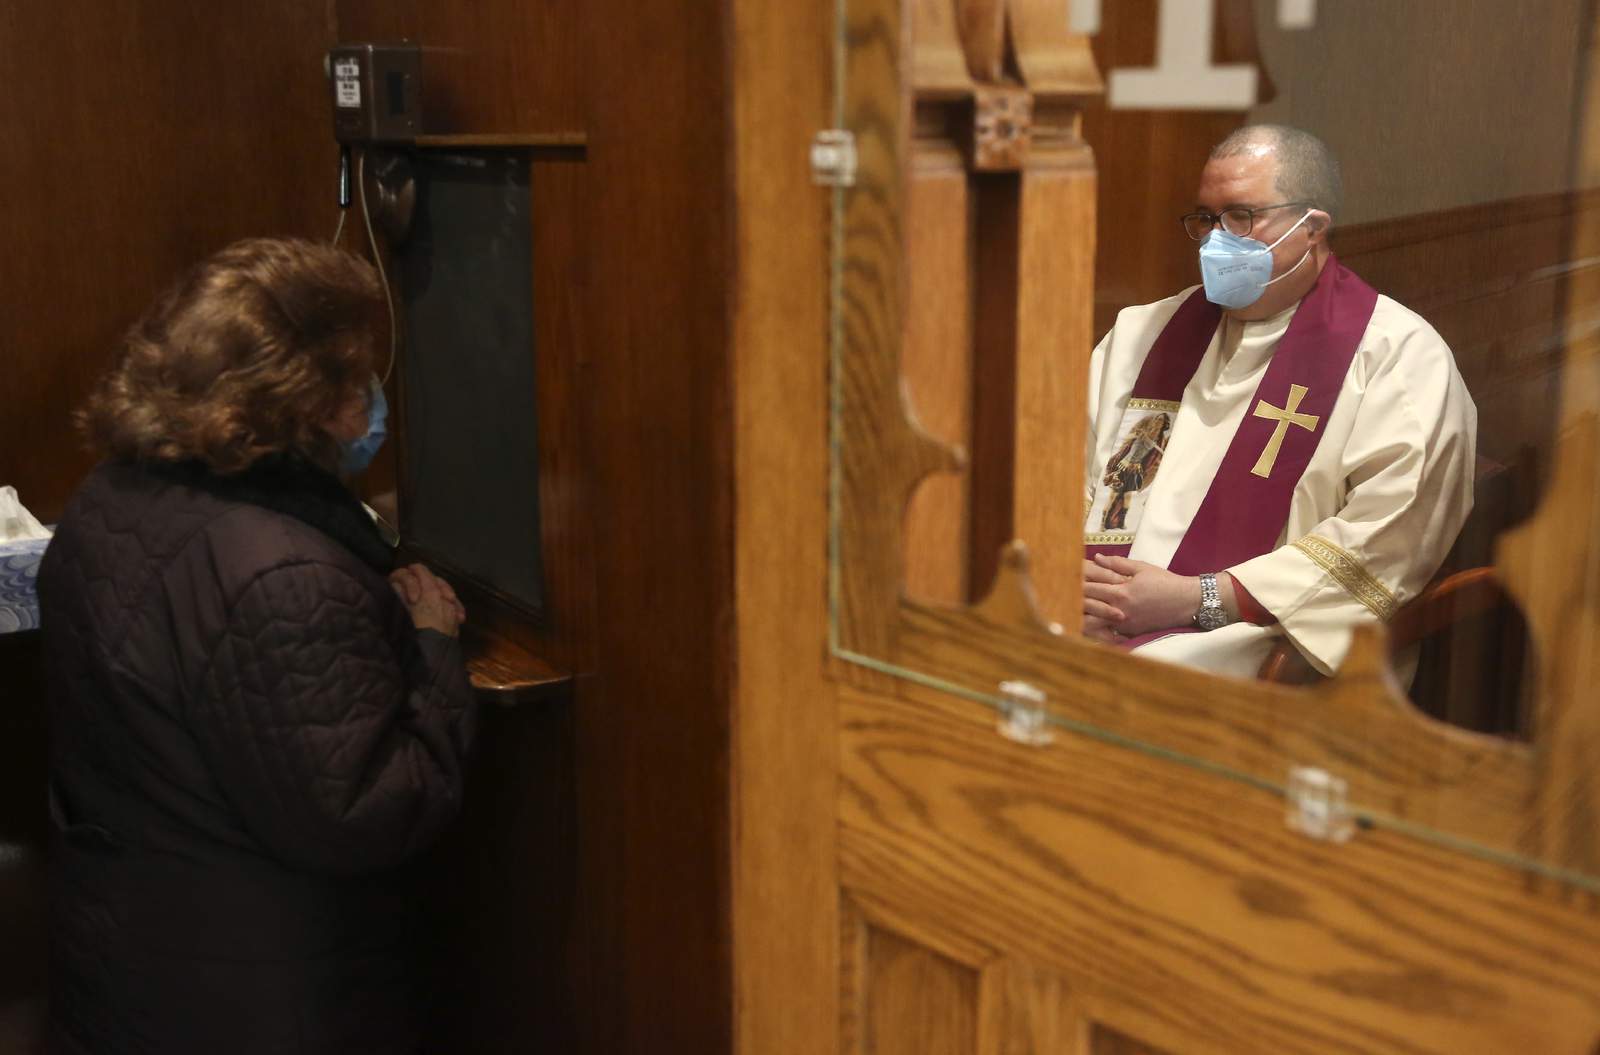 Church in NY virus epicenter leads congregants out of sorrow